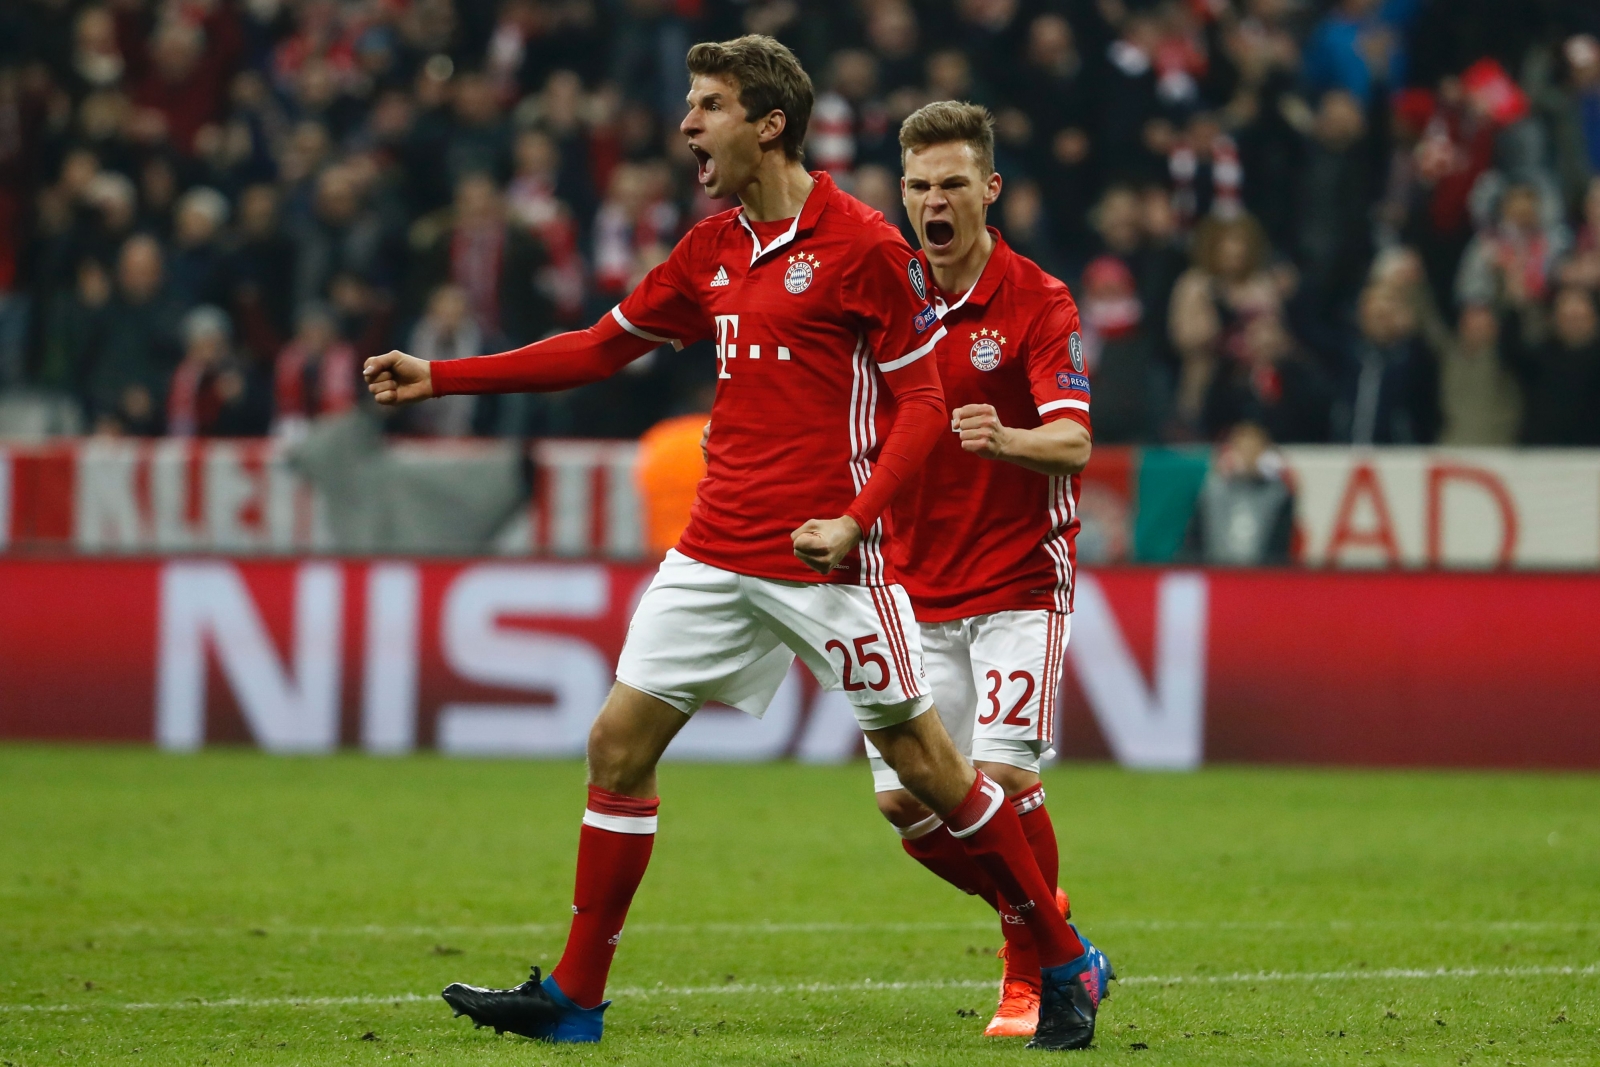 Bayern Munich give injury update on Manuel Neuer and Thomas Müller ahead of Real Madrid clash